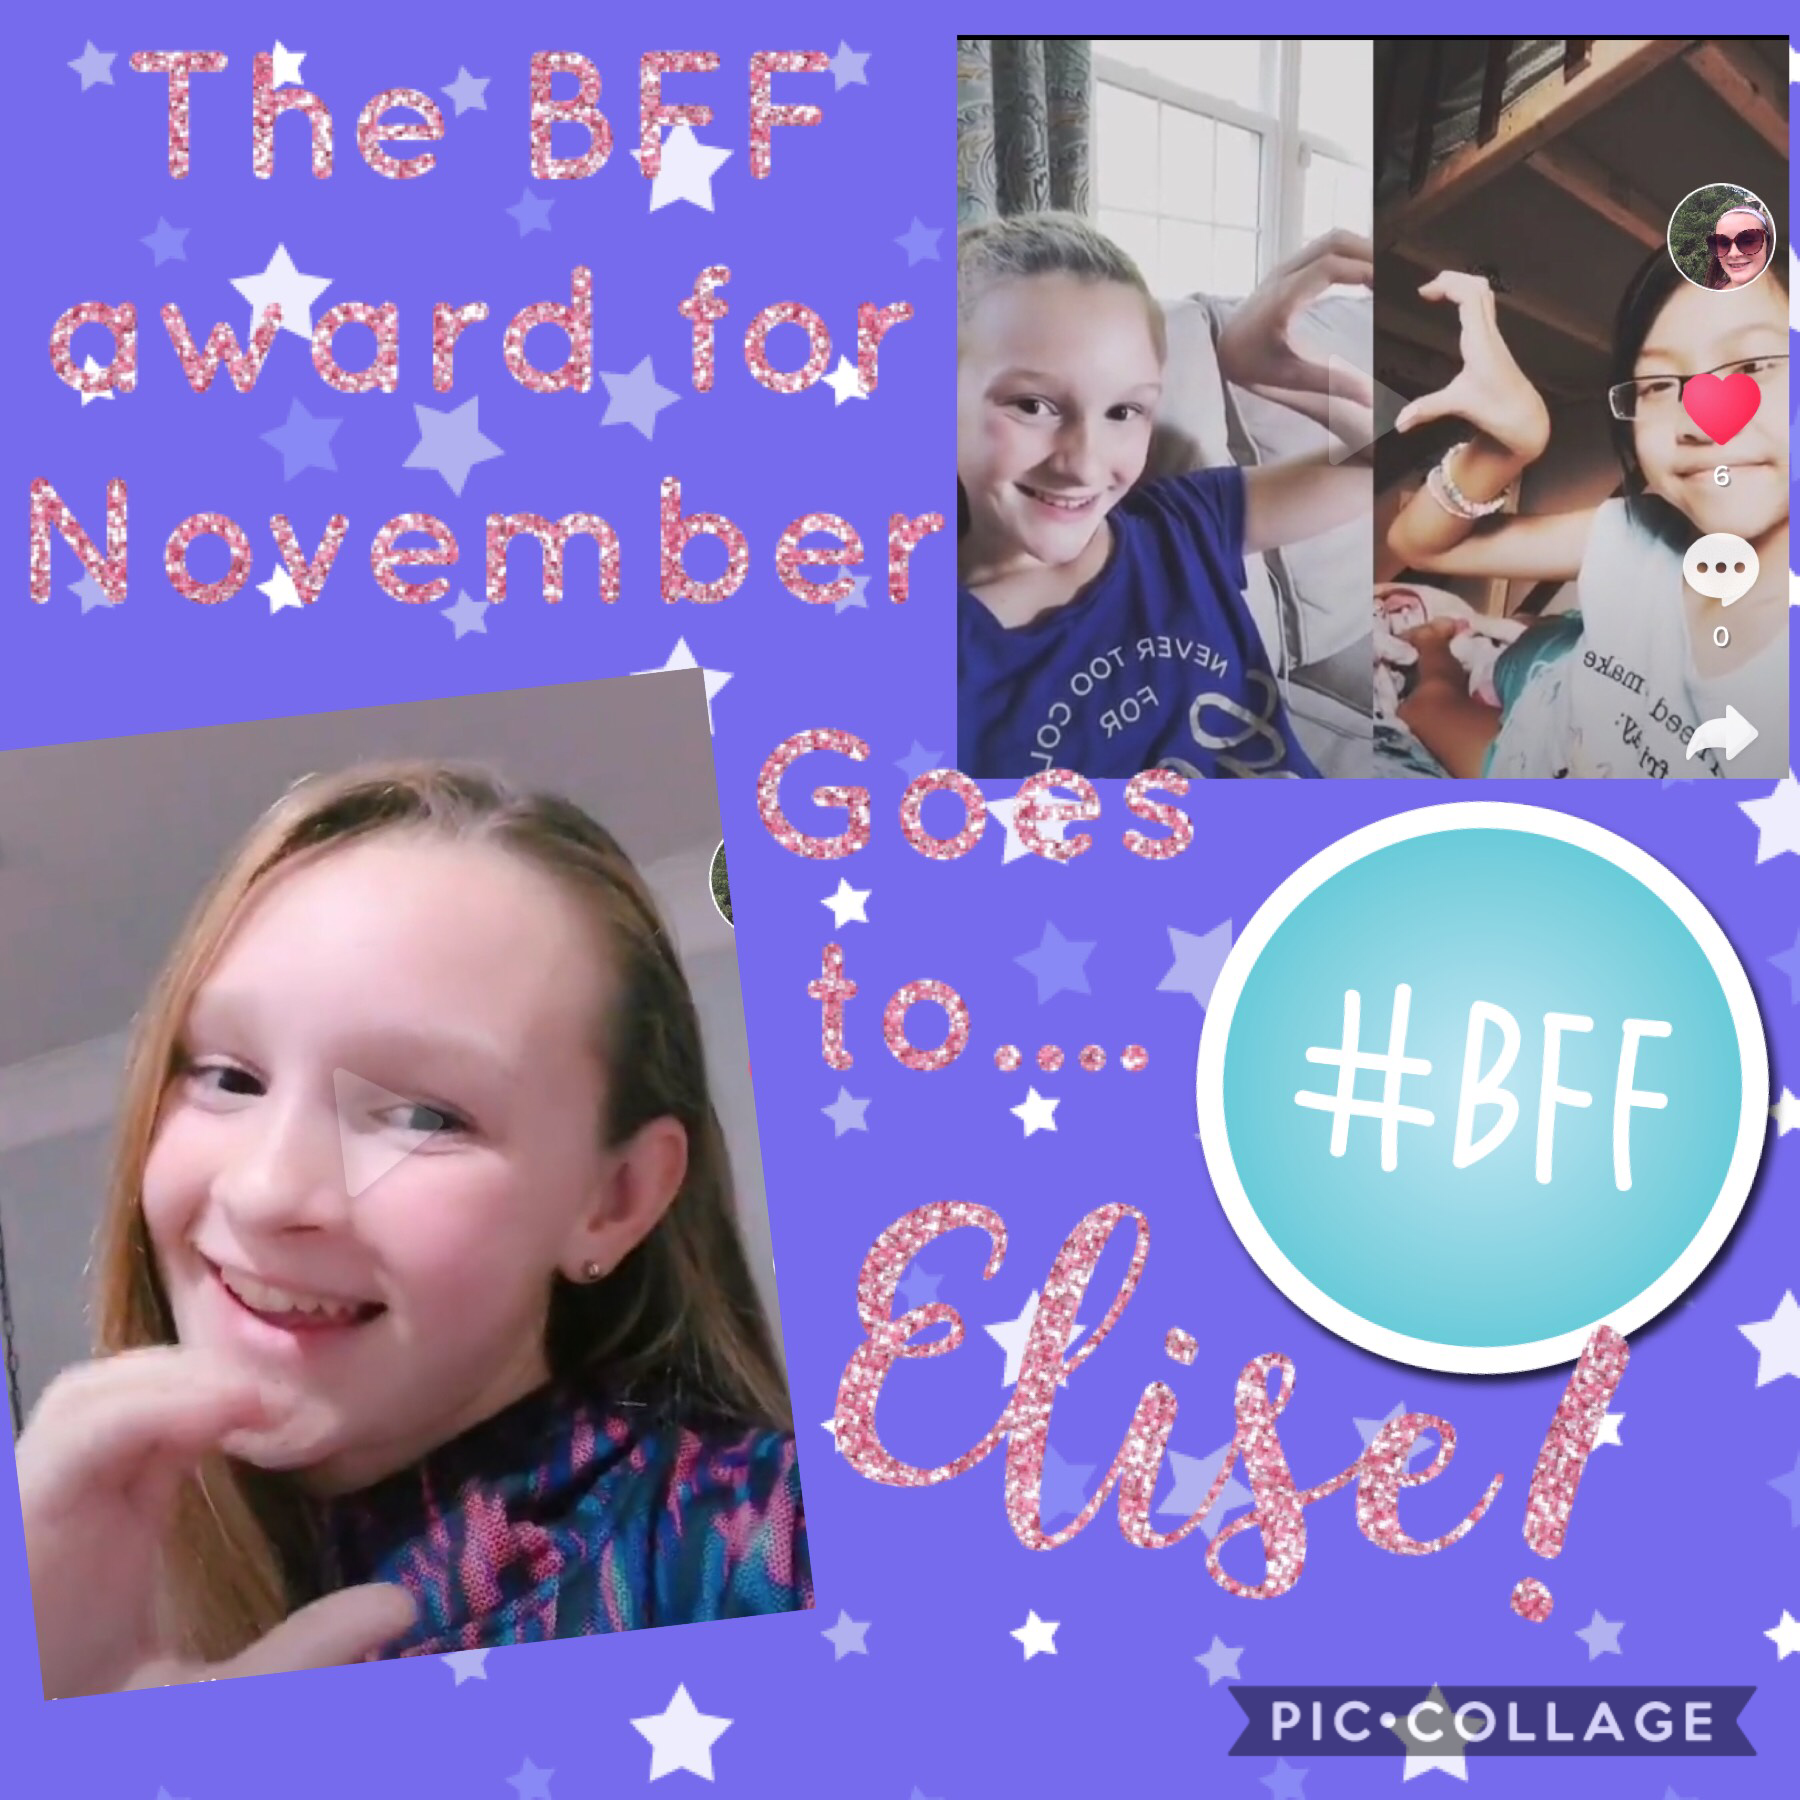 👭Tap👭
The BFF award for November goes to Elise!!She is always there for me no matter what! 